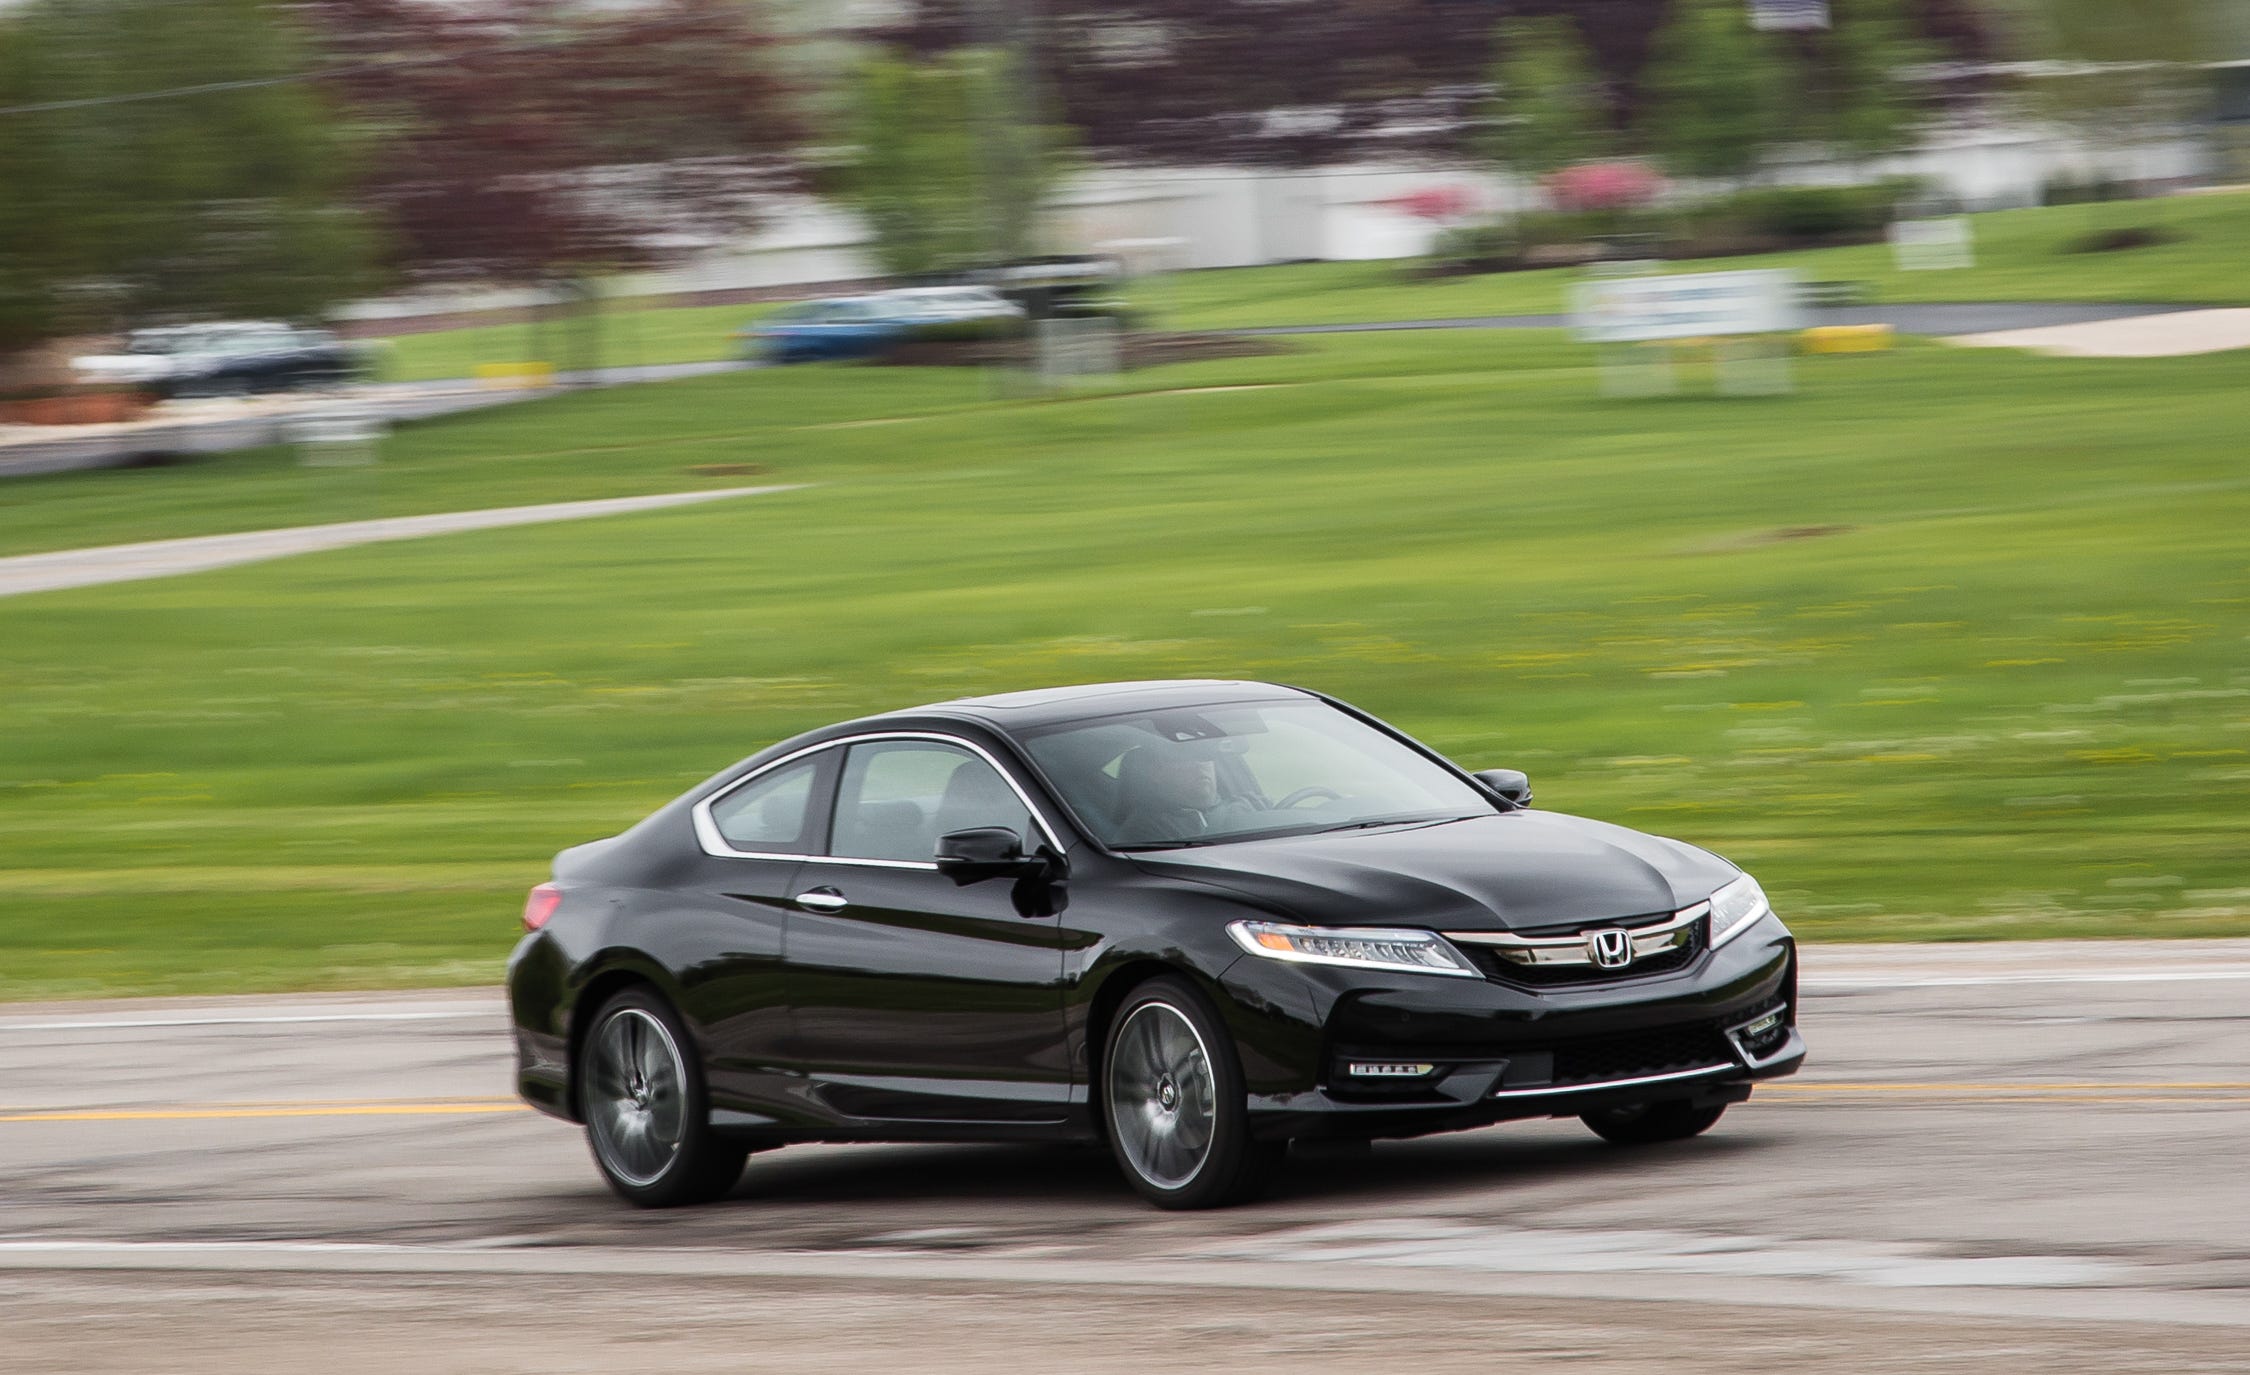 Honda Debuts 2016 Accord Facelift We Visually Compare It With The 2015MY   Carscoops